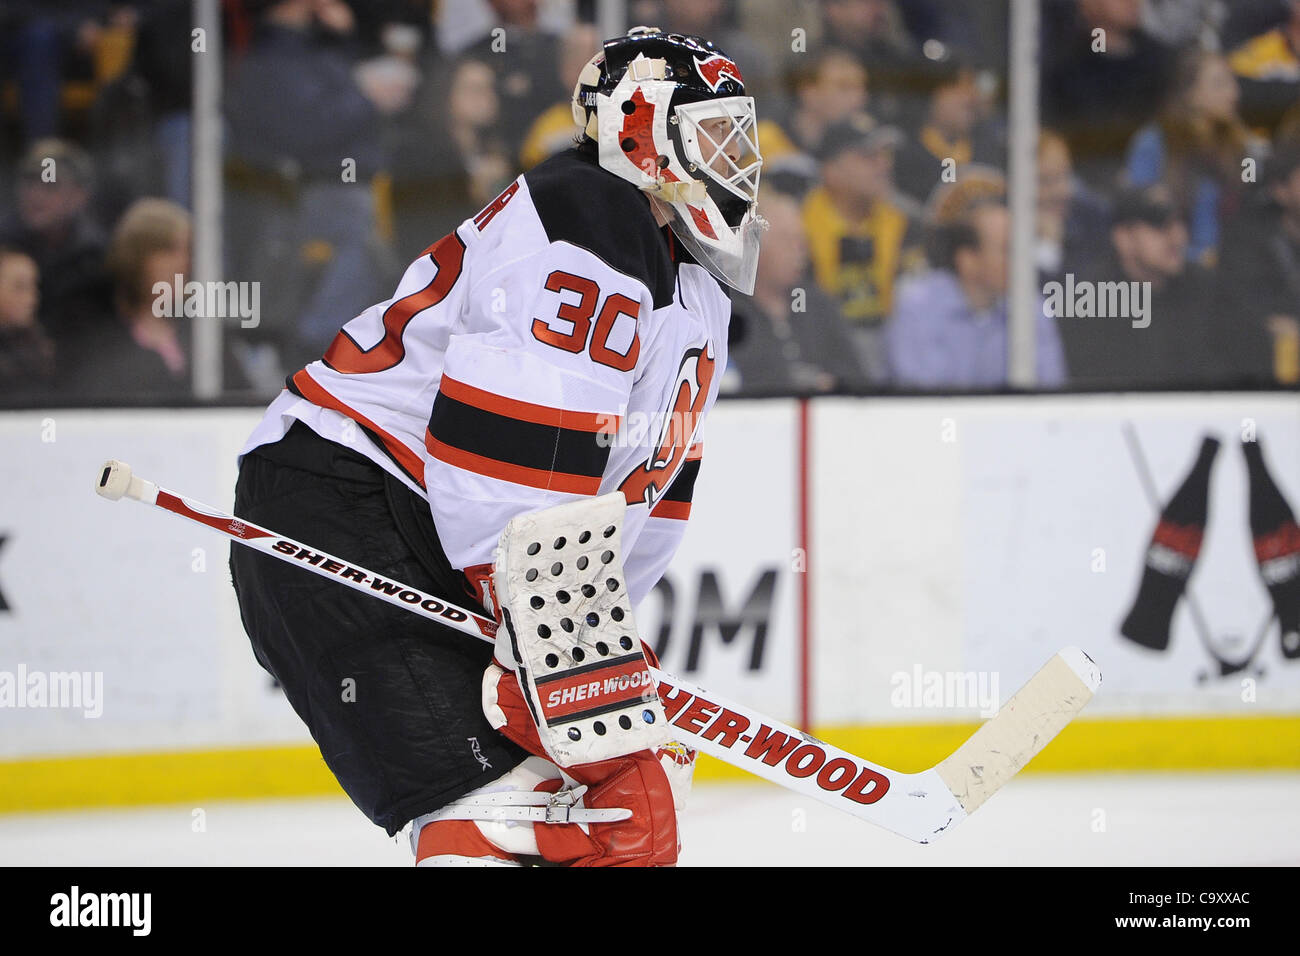 goalie-martin-brodeur-of-the-eastern-conference-and-the-new-jersey-picture-id80736740  (668×1024)